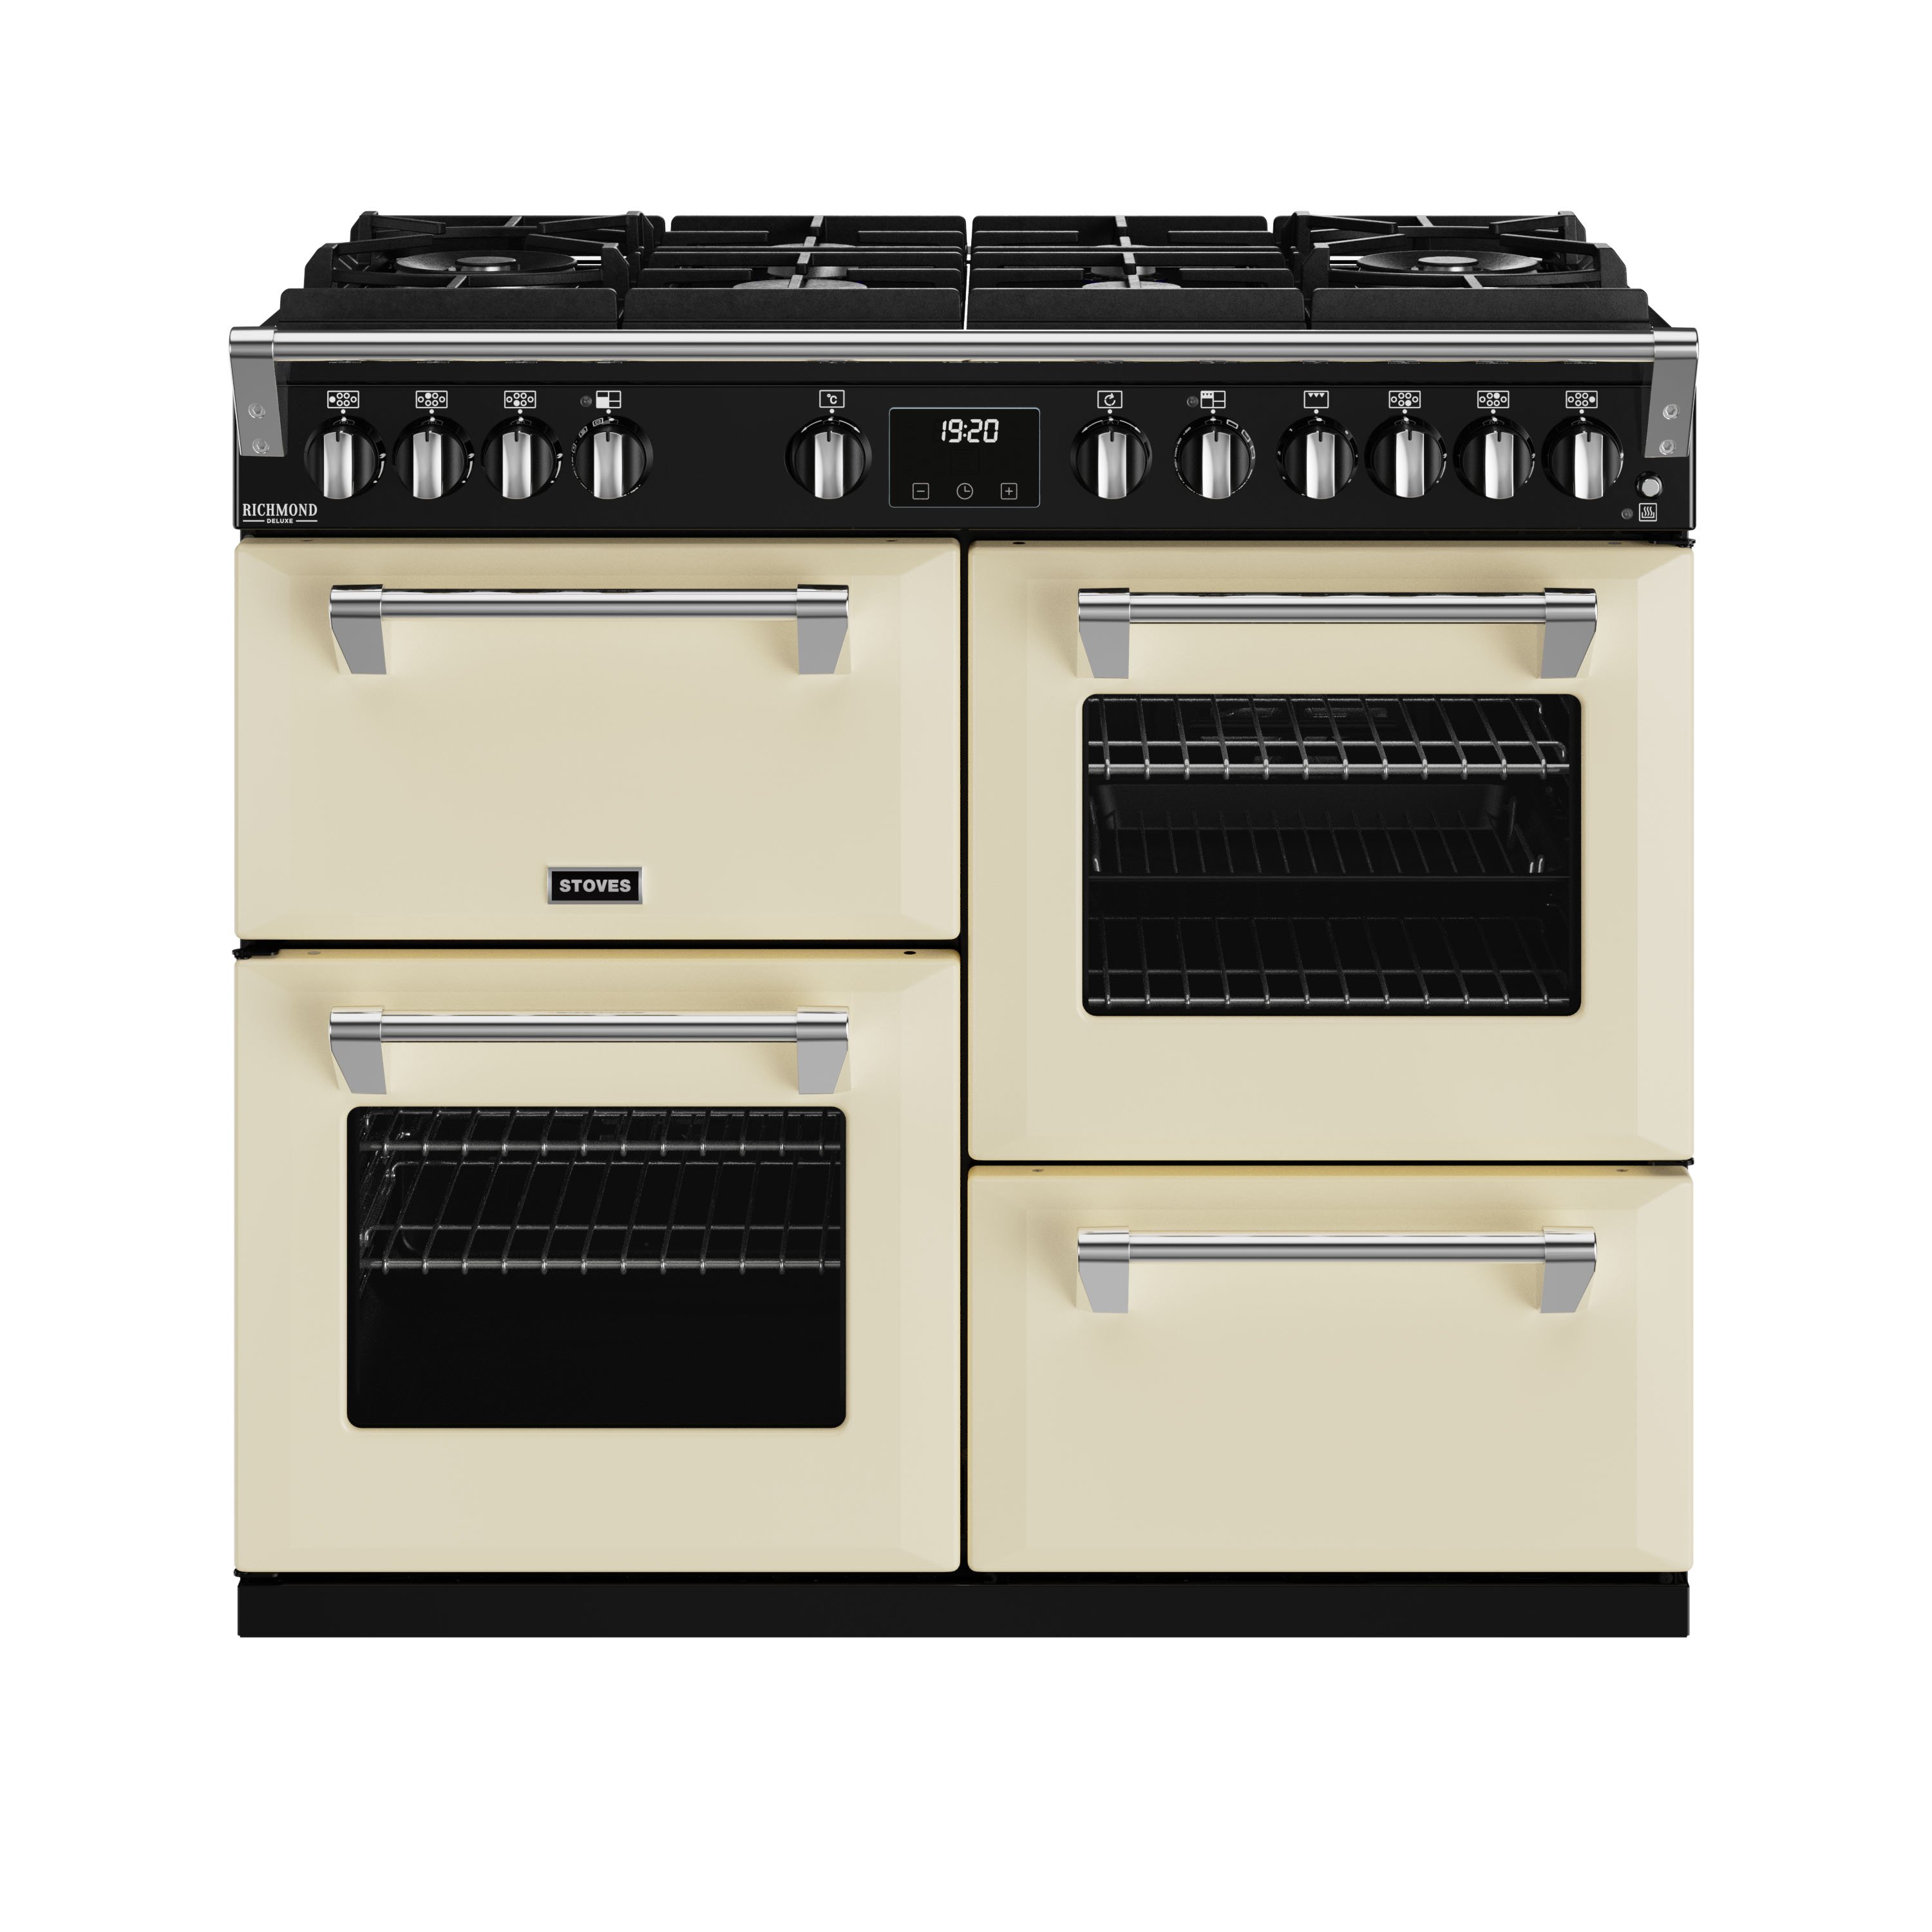 100cm dual fuel range cooker with a 6 burner Gas-Through-Glass hob, conventional oven & grill, multifunction main oven with TrueTemp digital thermostat, fanned second oven and dedicated slow cook oven